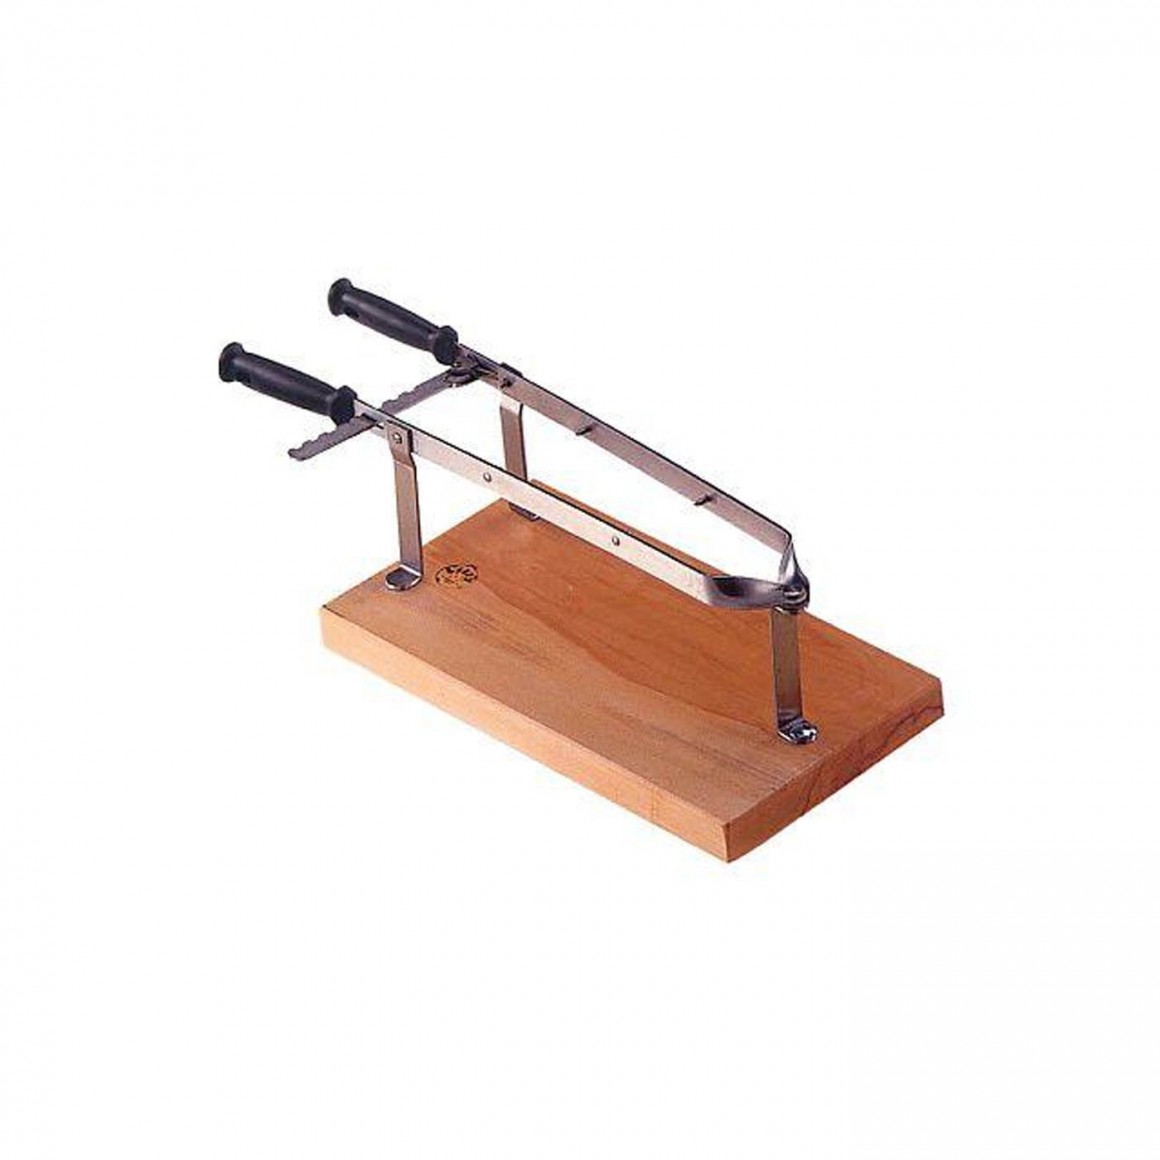 Stainless steel Ham holding vice with wooden base